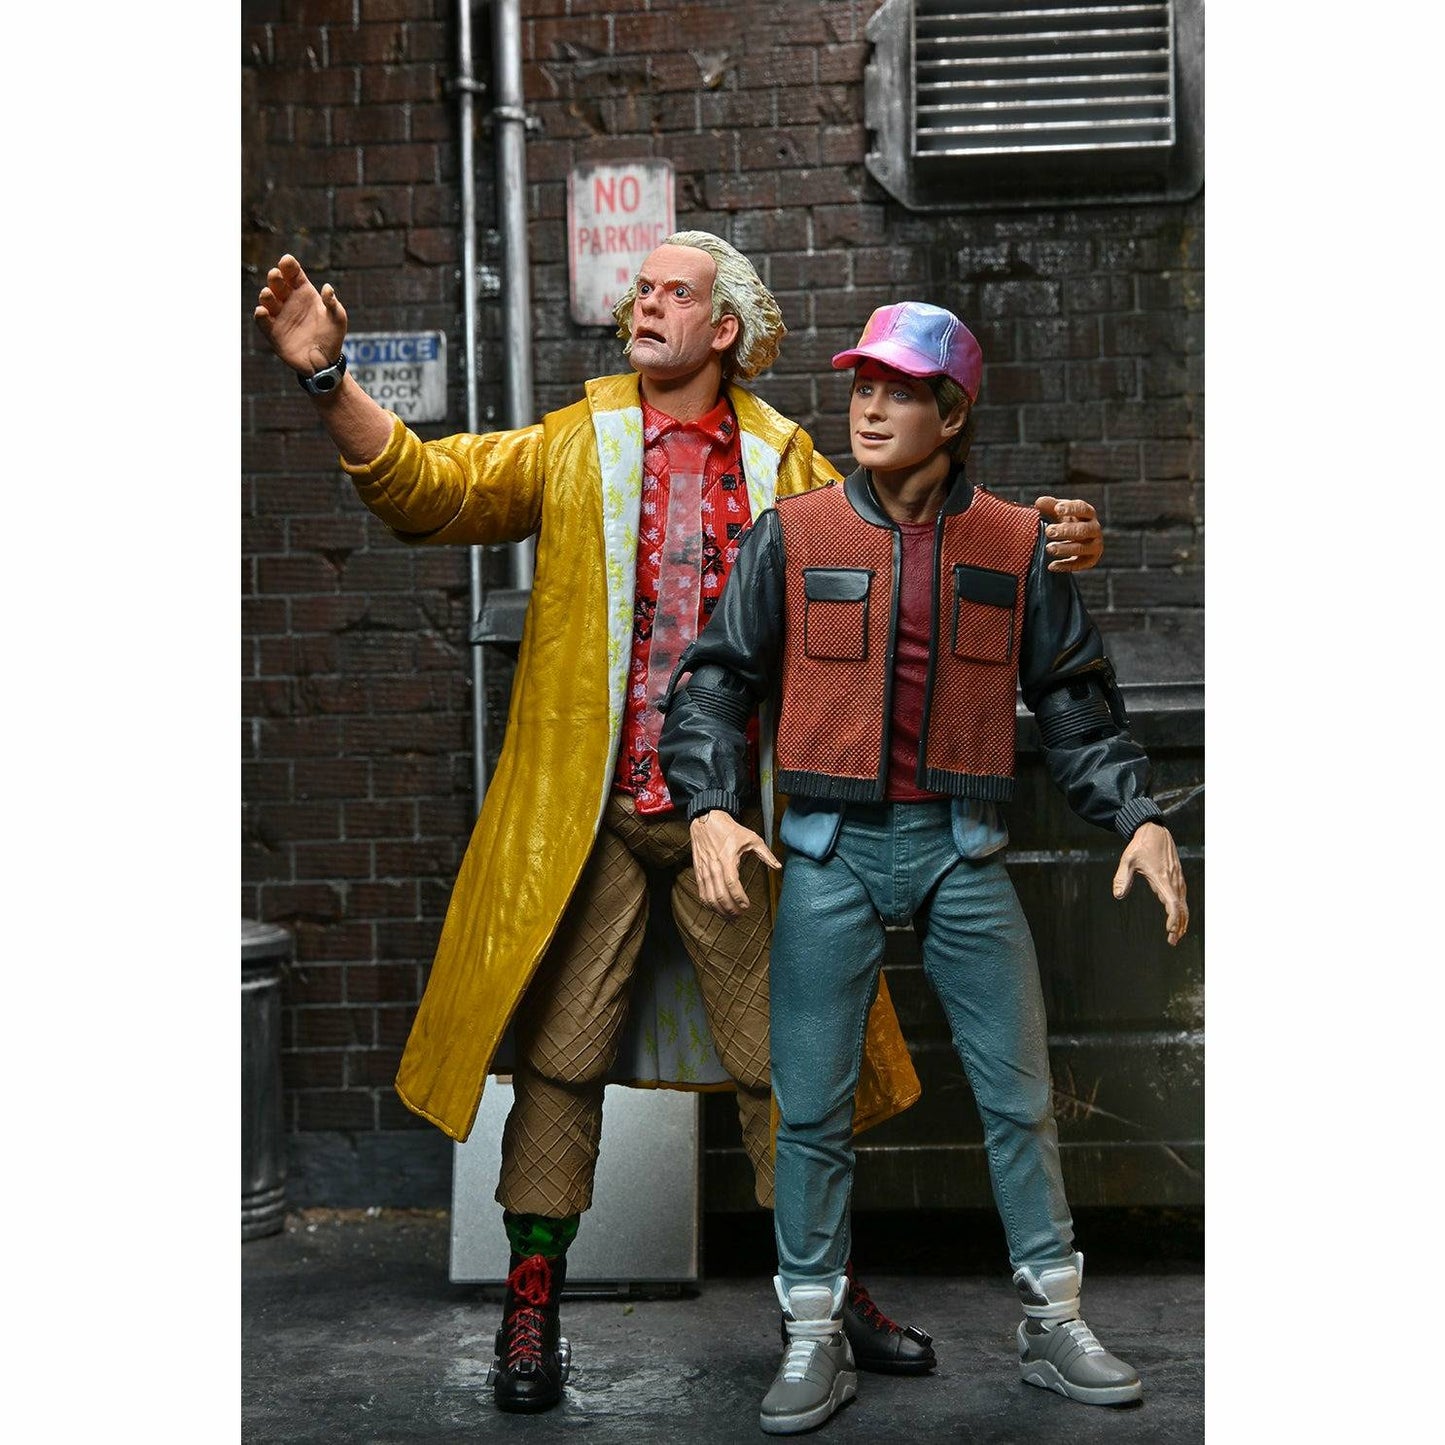 NECA Back to the Future Part II 7" Scale Action Figure - Ultimate Marty McFly (2015) Action Figure NECA